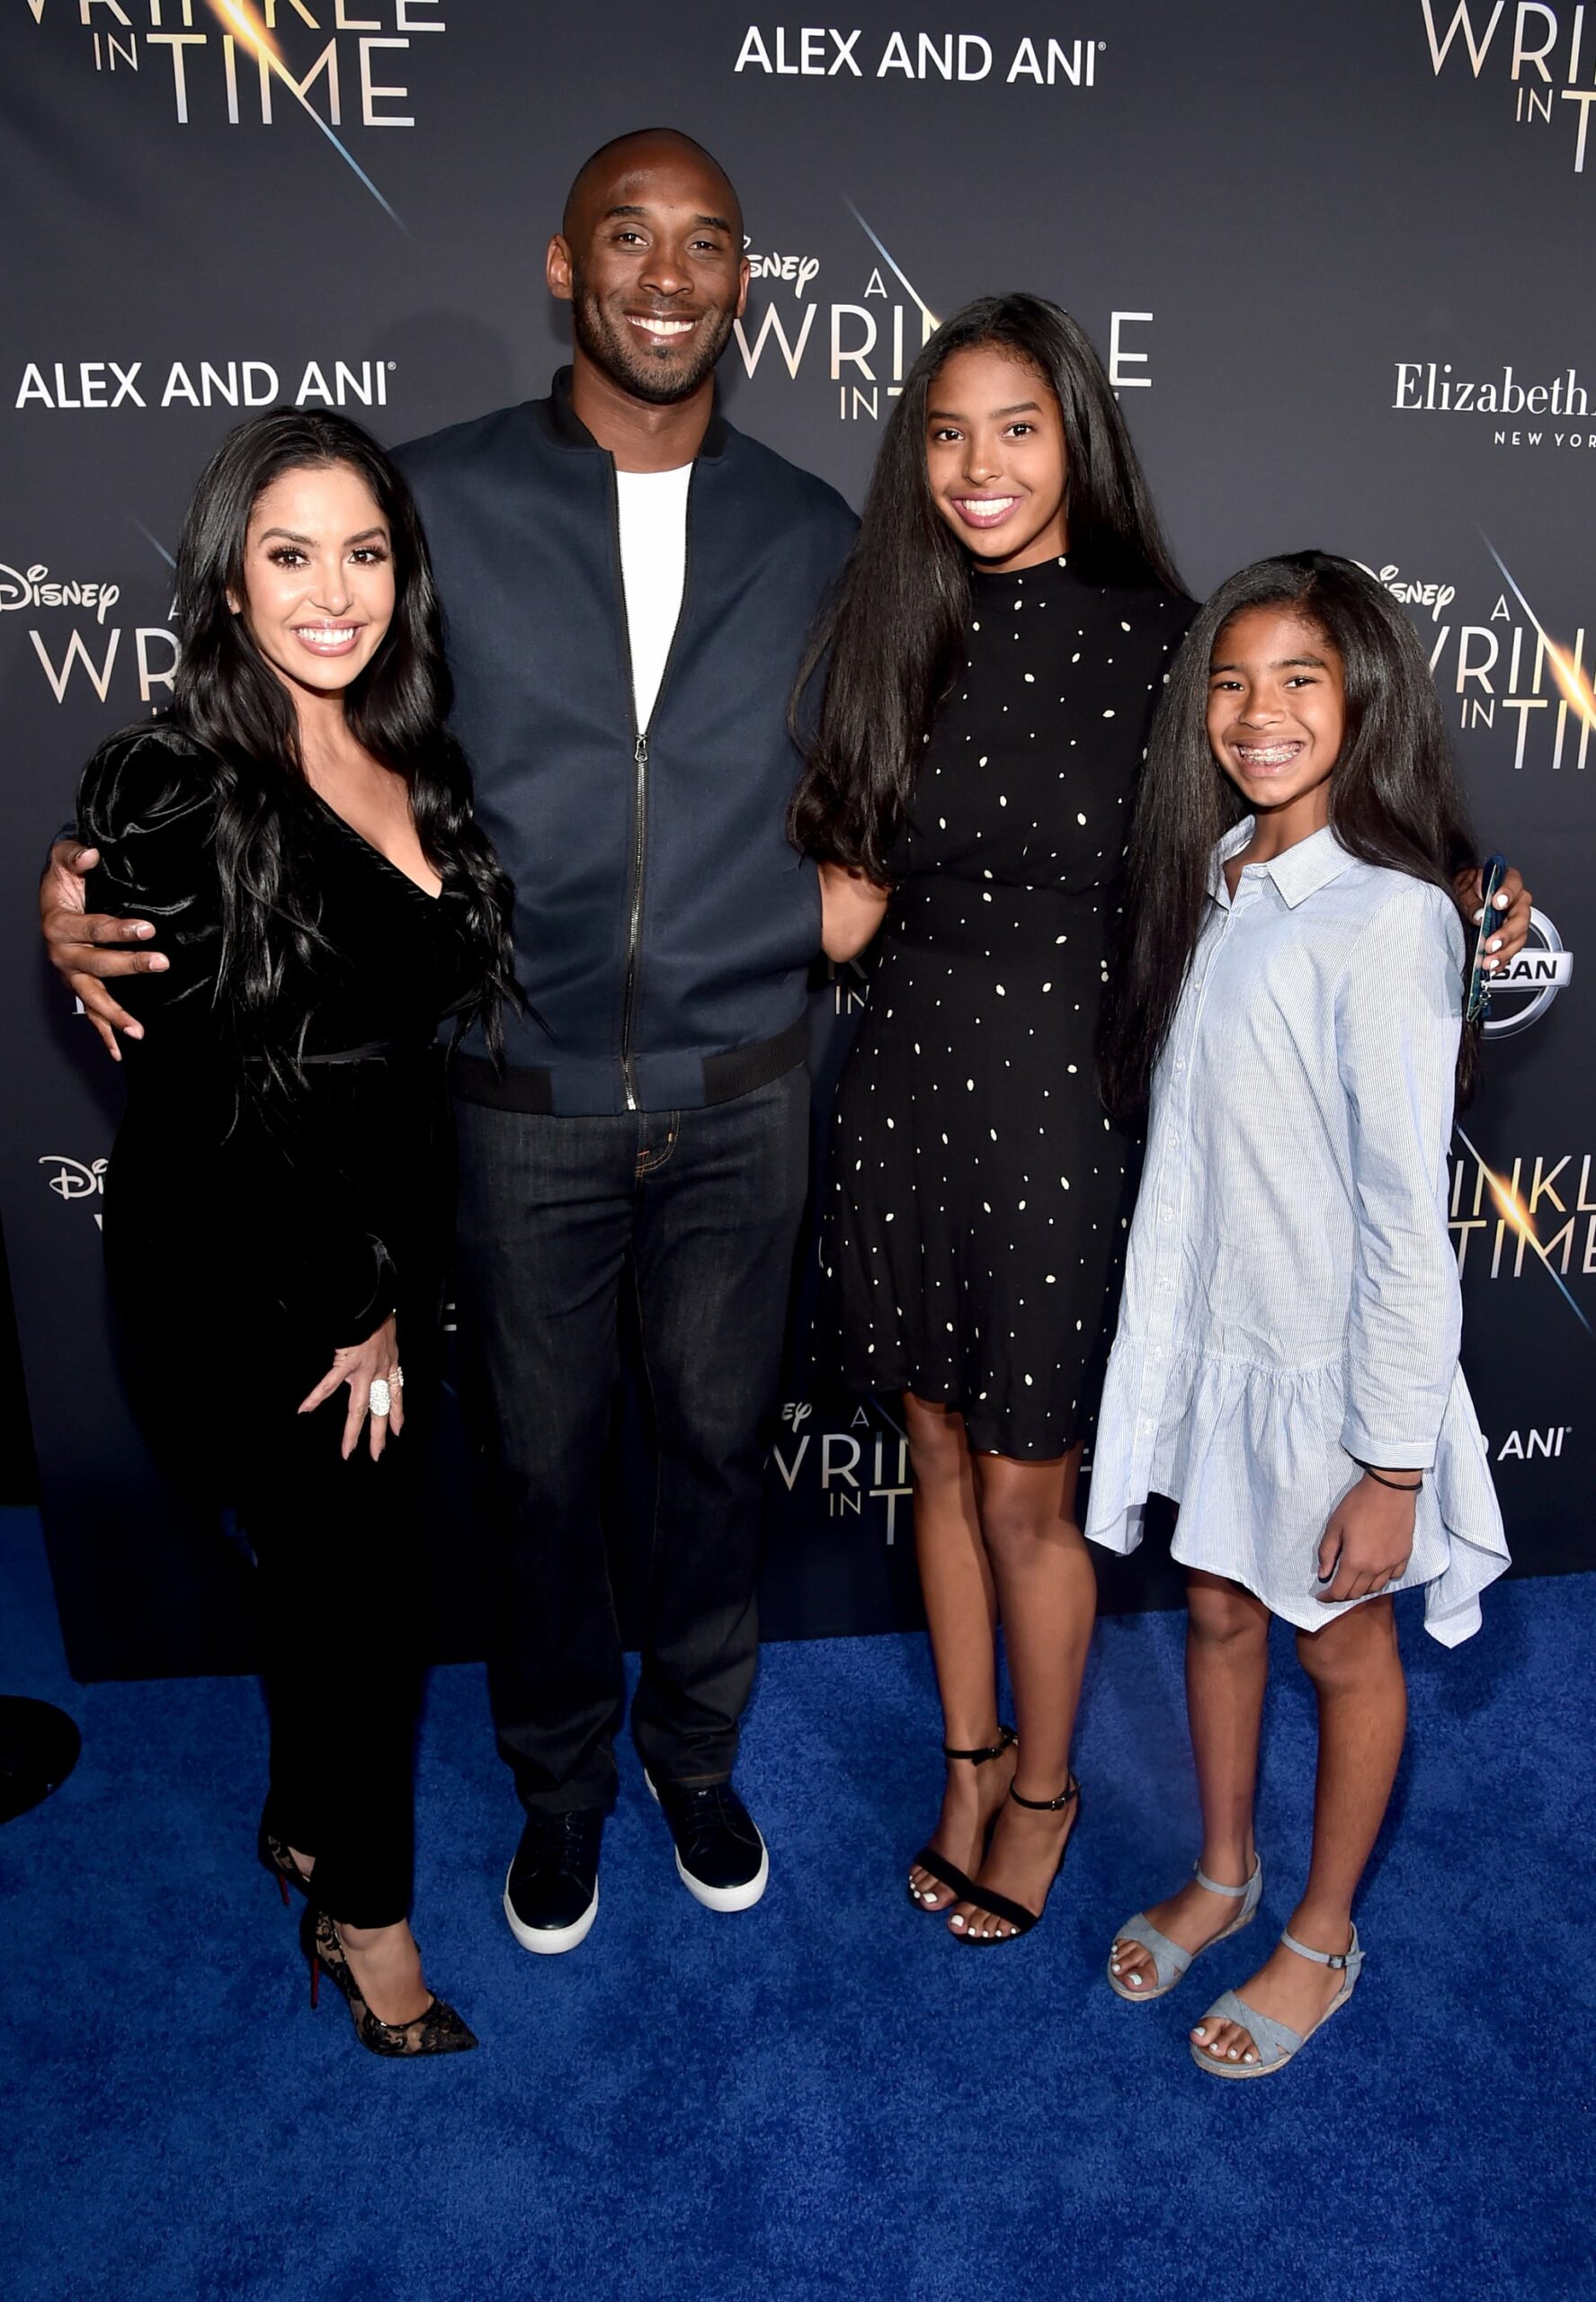 LOS ANGELES, CA - FEBRUARY 26:  (L-R) Vanessa Laine Bryant, former NBA player Kobe Bryant, Natalia Diamante Bryant, and Gianna Maria-Onore Bryant arrive at the world premiere of Disneys 'A Wrinkle in Time' at the El Capitan Theatre in Hollywood CA, Feburary 26, 2018.  (Photo by Alberto E. Rodriguez/Getty Images for Disney)